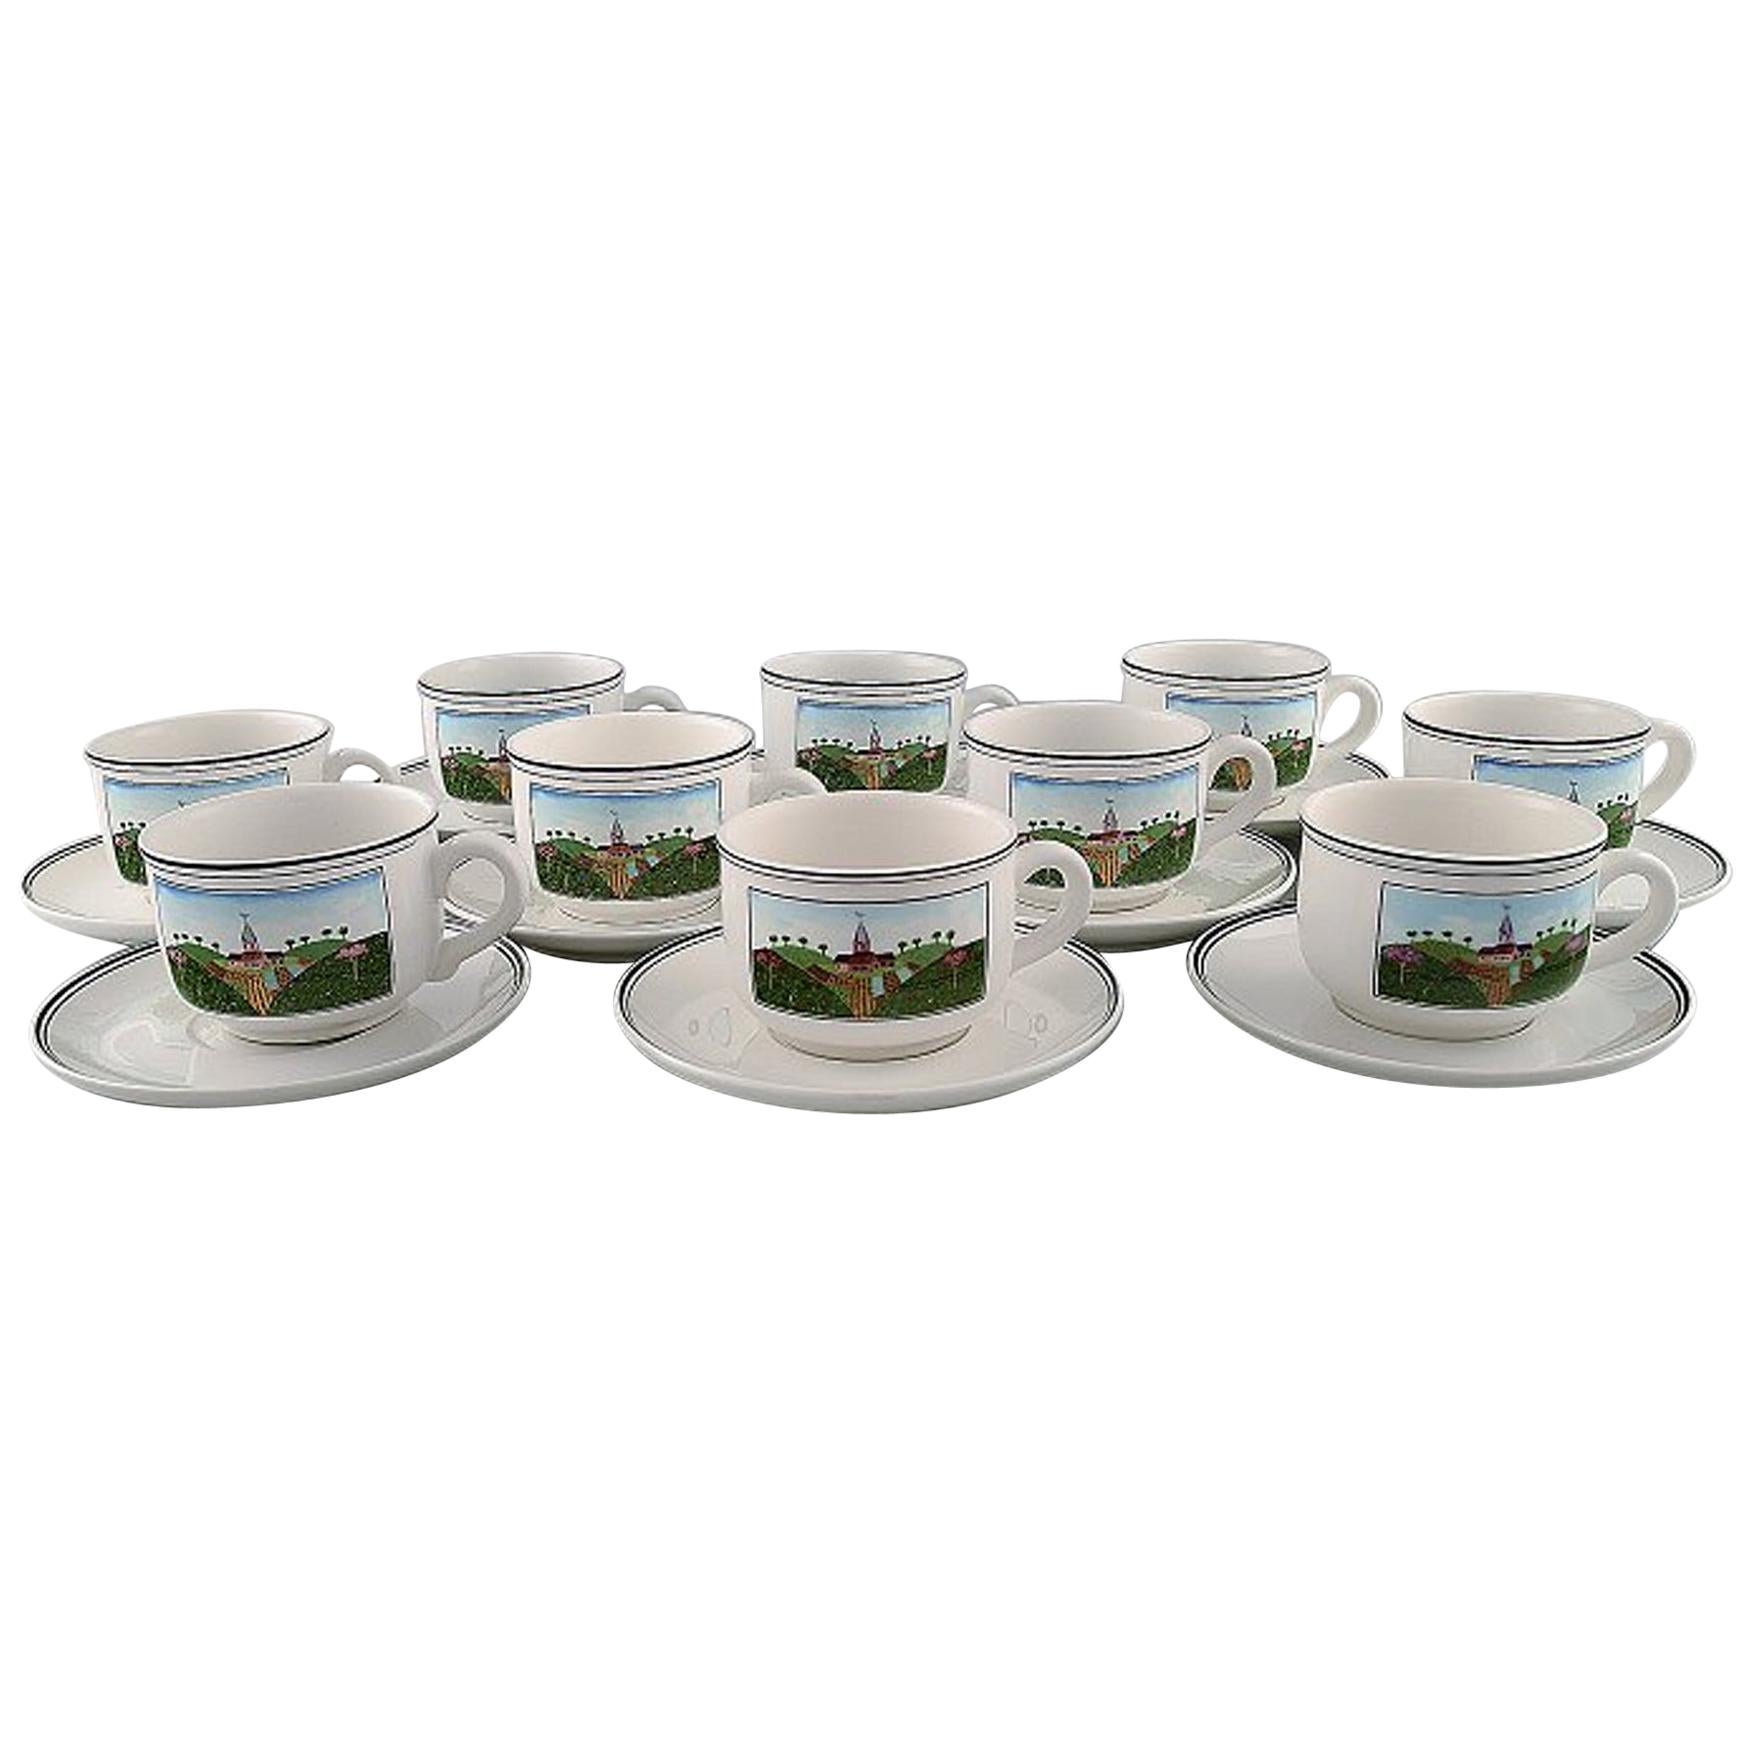 Villeroy & Boch Naif Coffee Service in Porcelain, Set of 10 Large Cups & Saucers